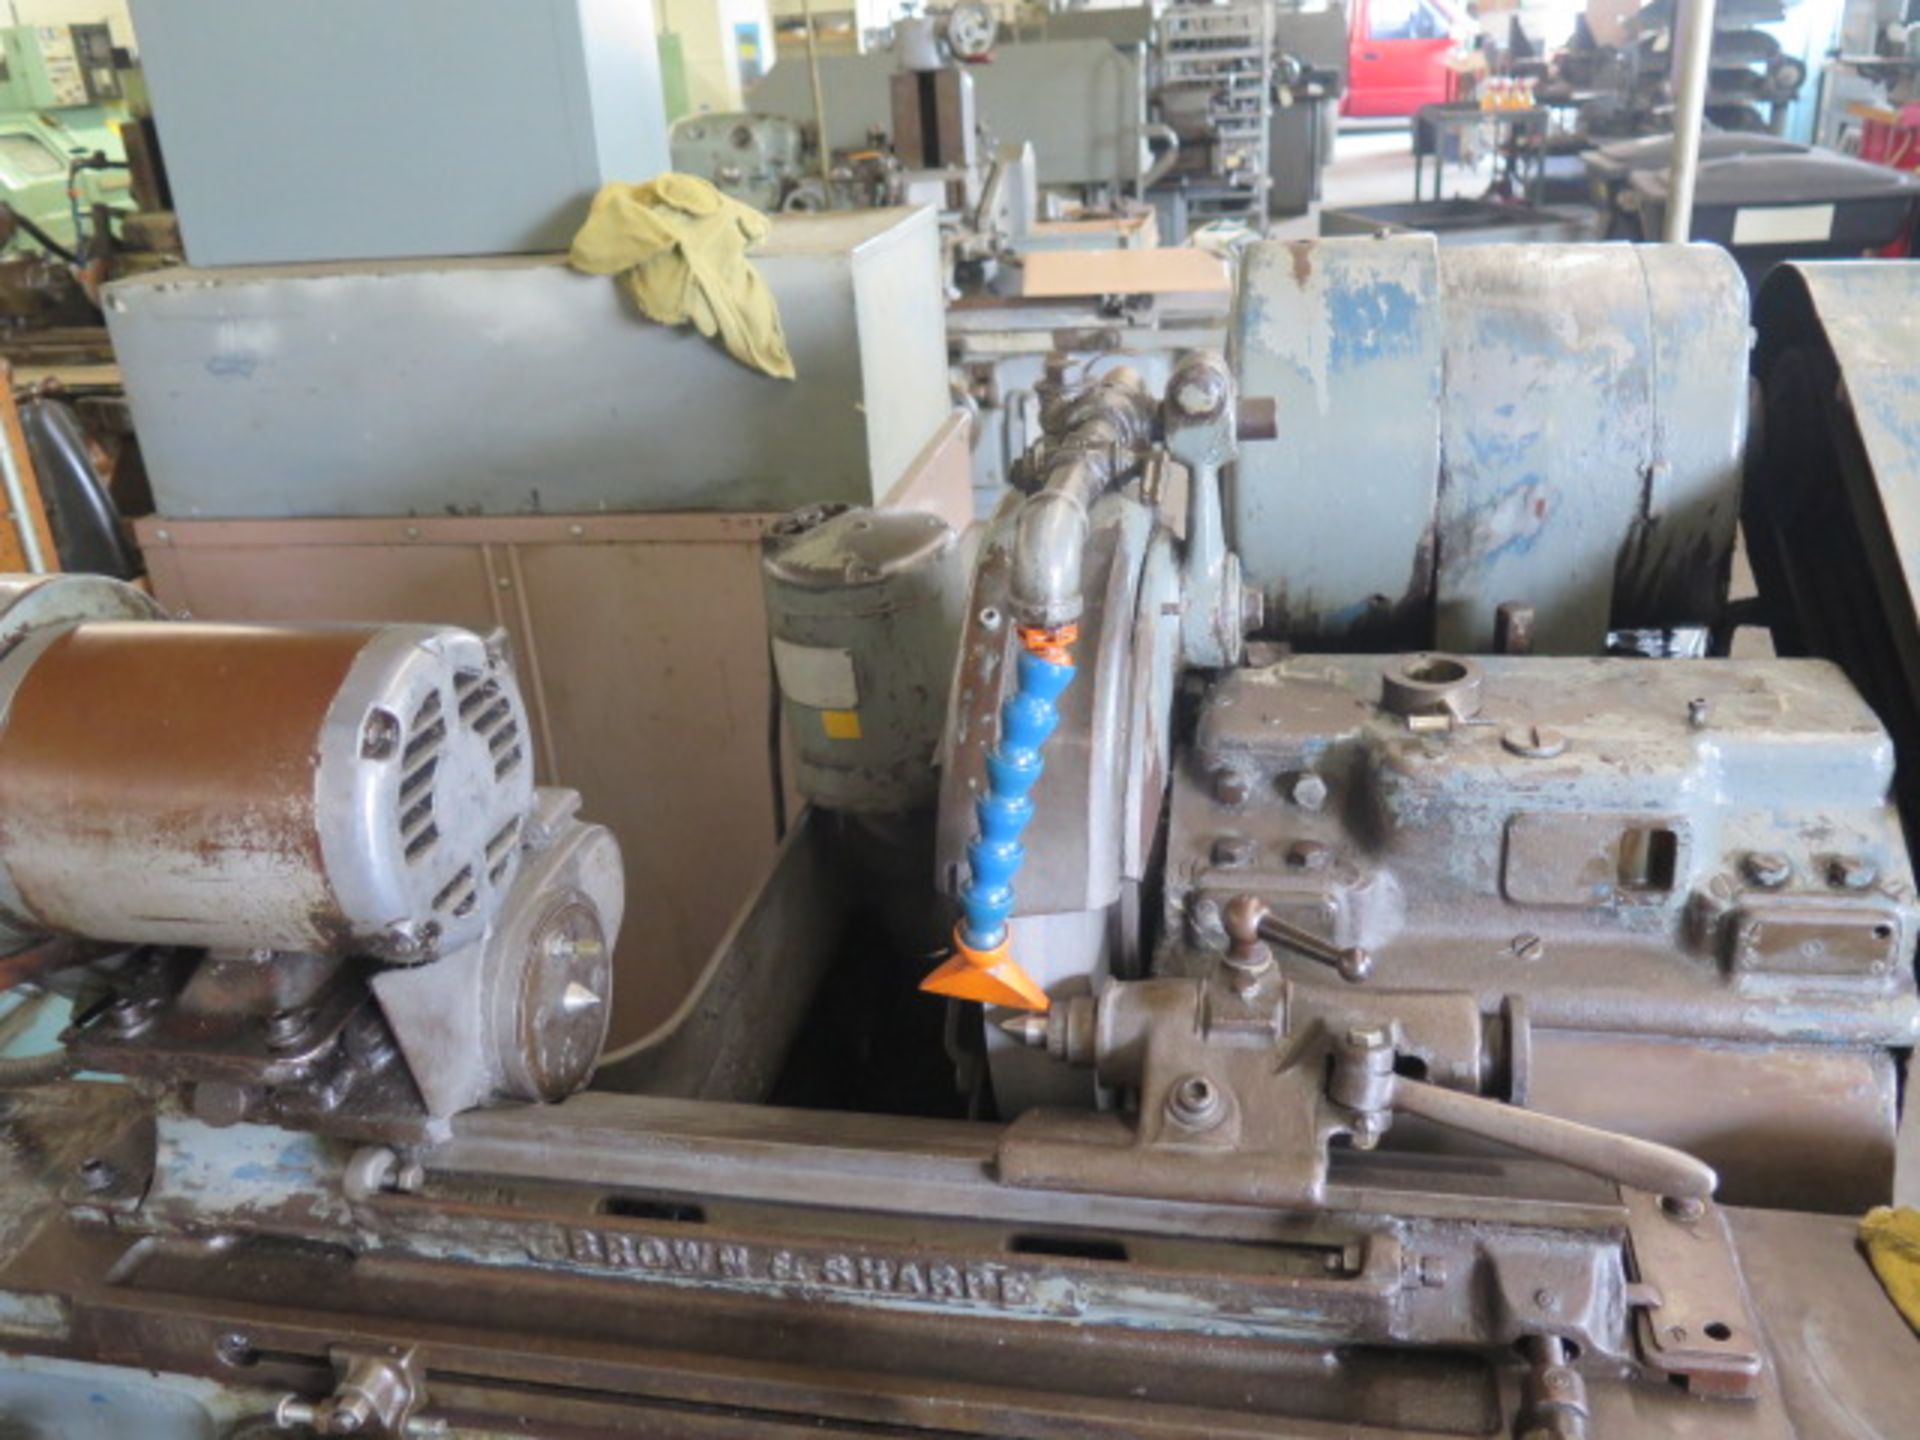 Brown & Sharpe mdl. 5 4” x 12” Automatic Universal Cylindrical Grinder w/ Motorized Work Head, - Image 3 of 6